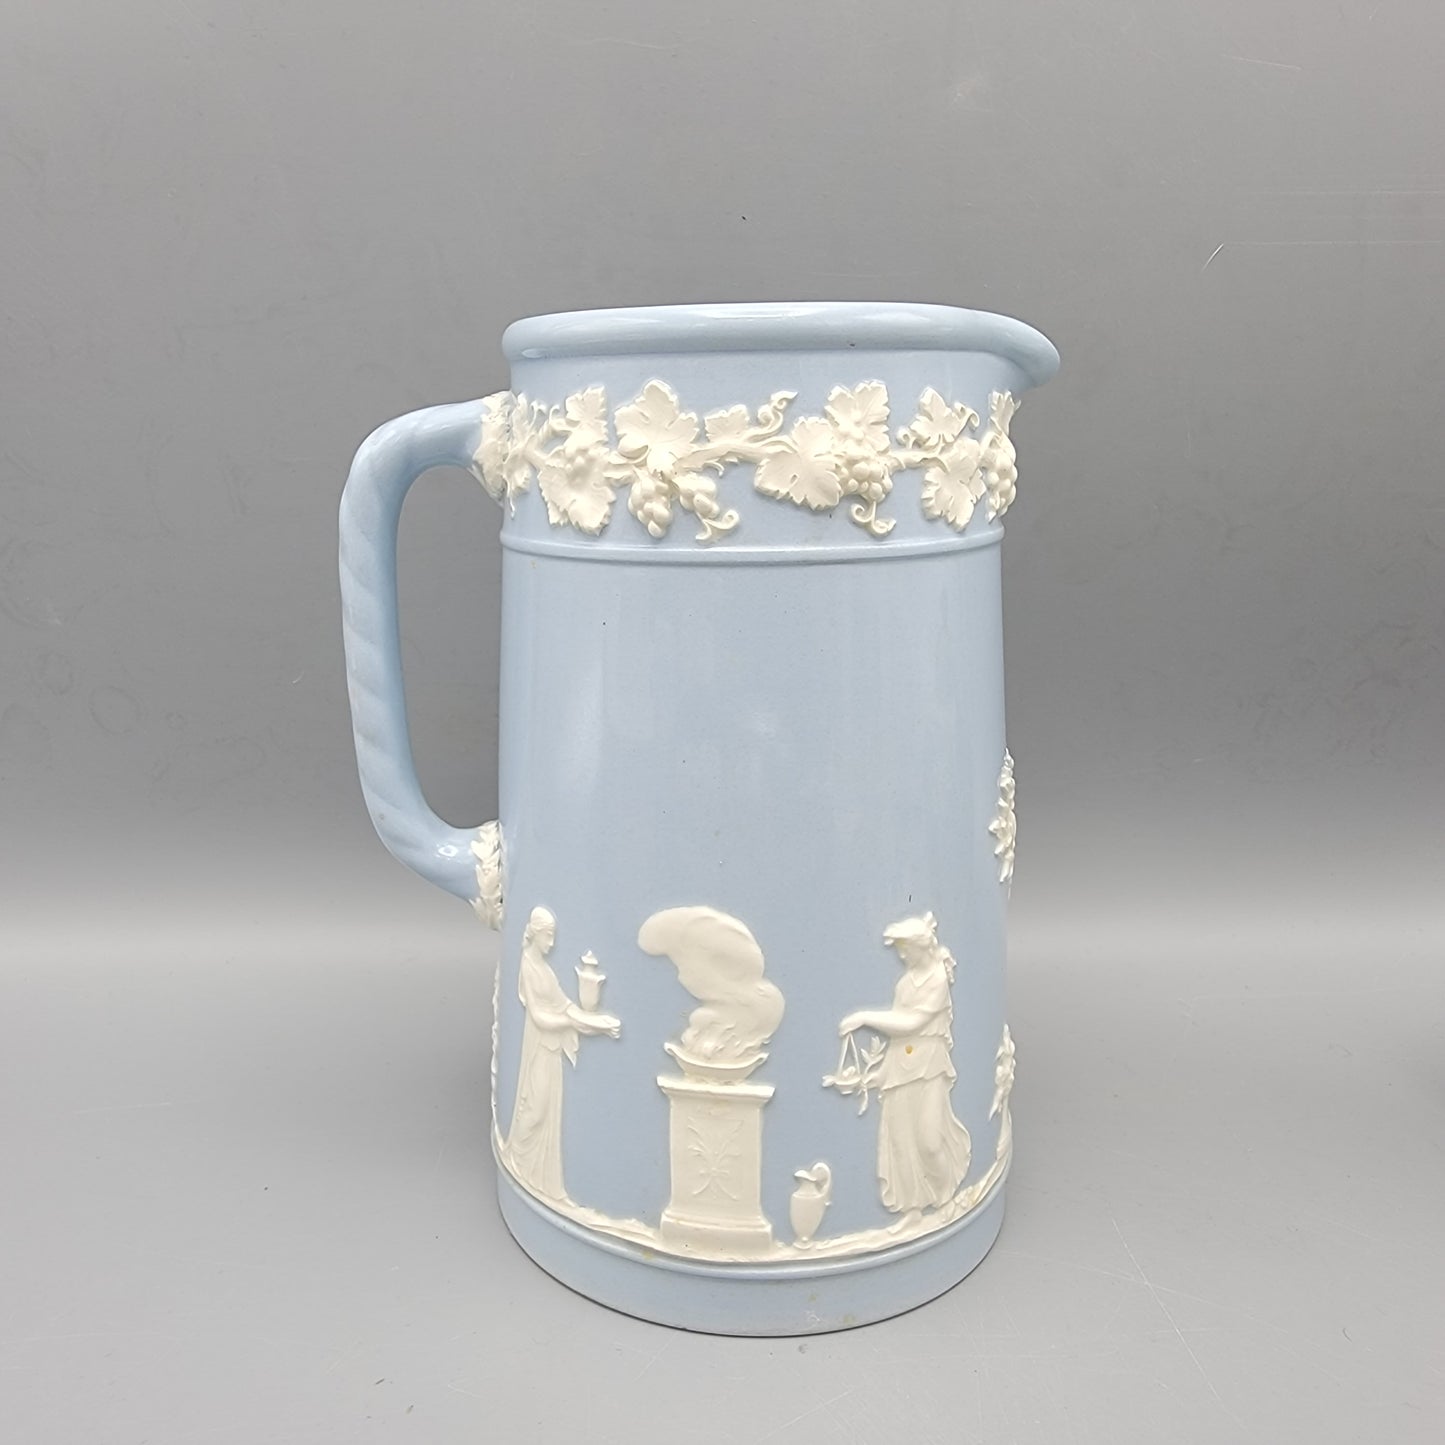 Wedgwood Queensware White on Blue Upright Jug